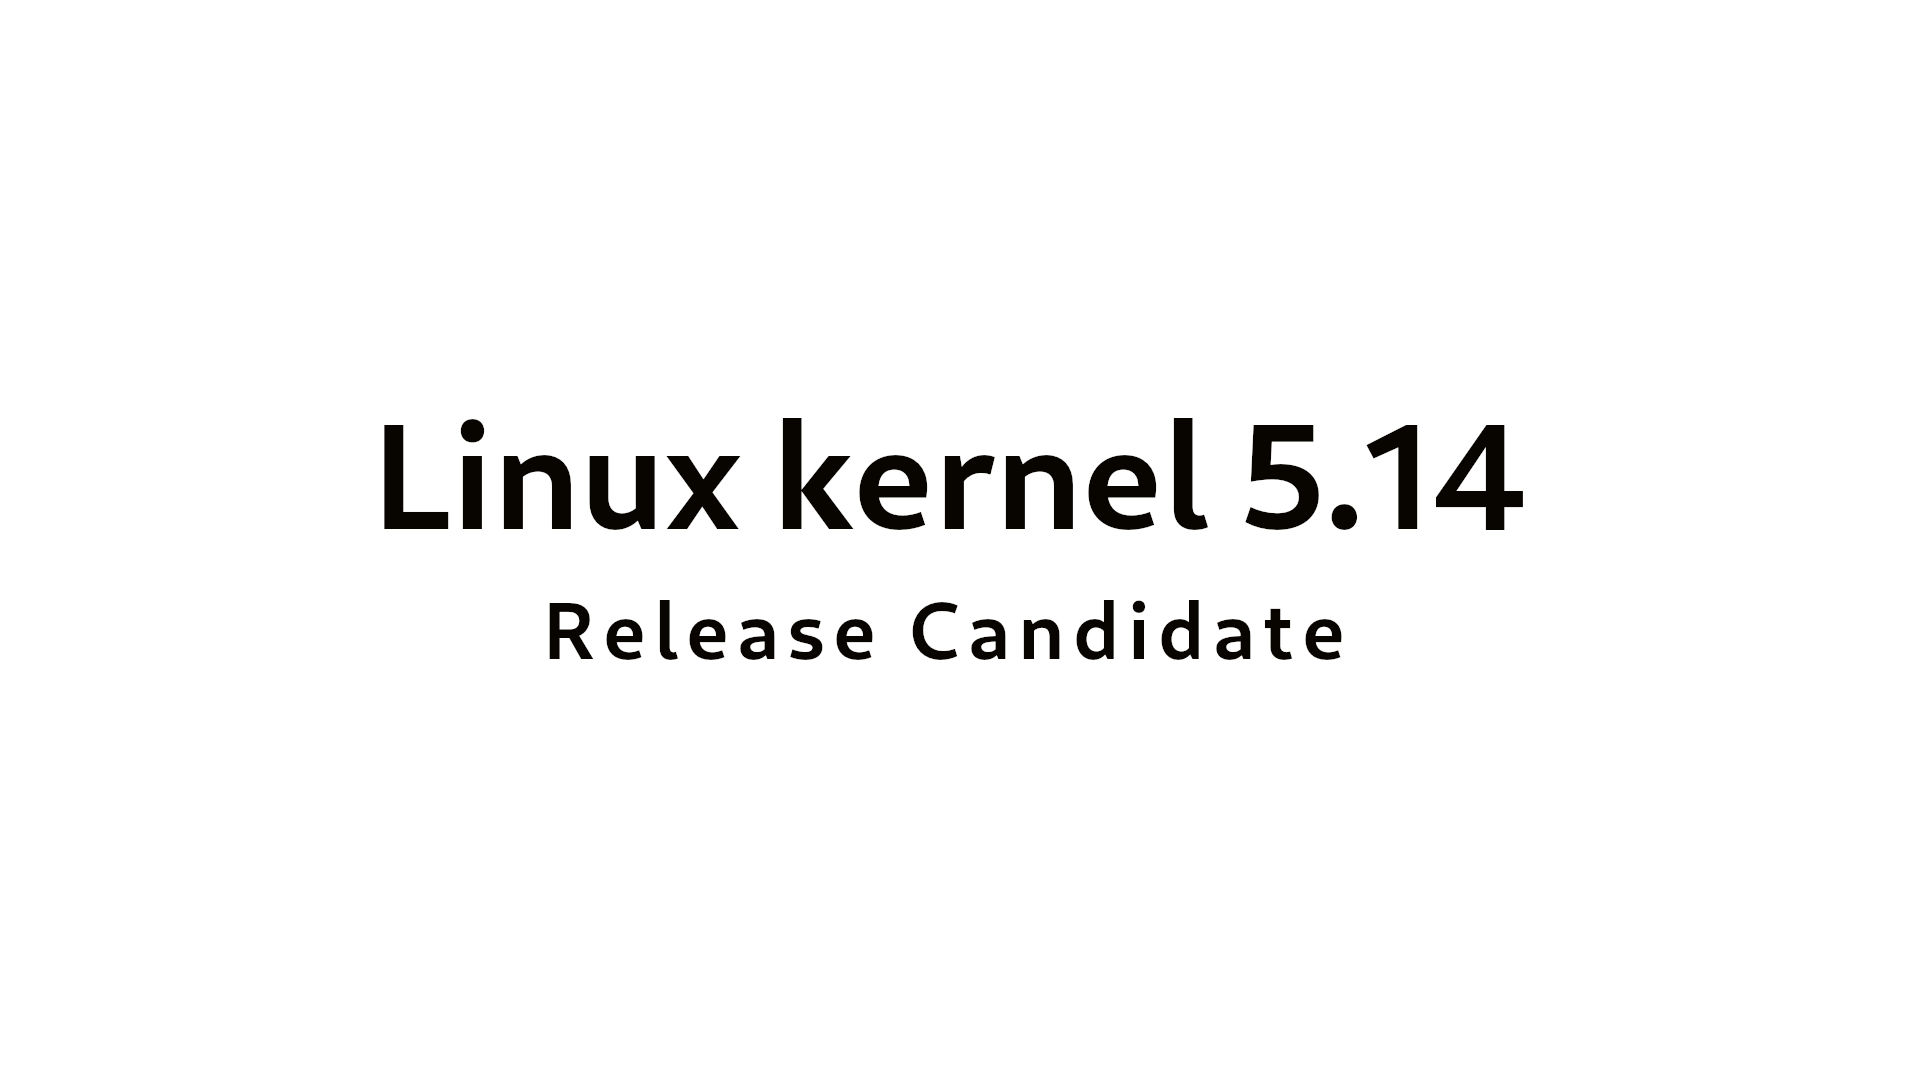 Linus Torvalds Announces First Linux 5.14 Kernel Release Candidate